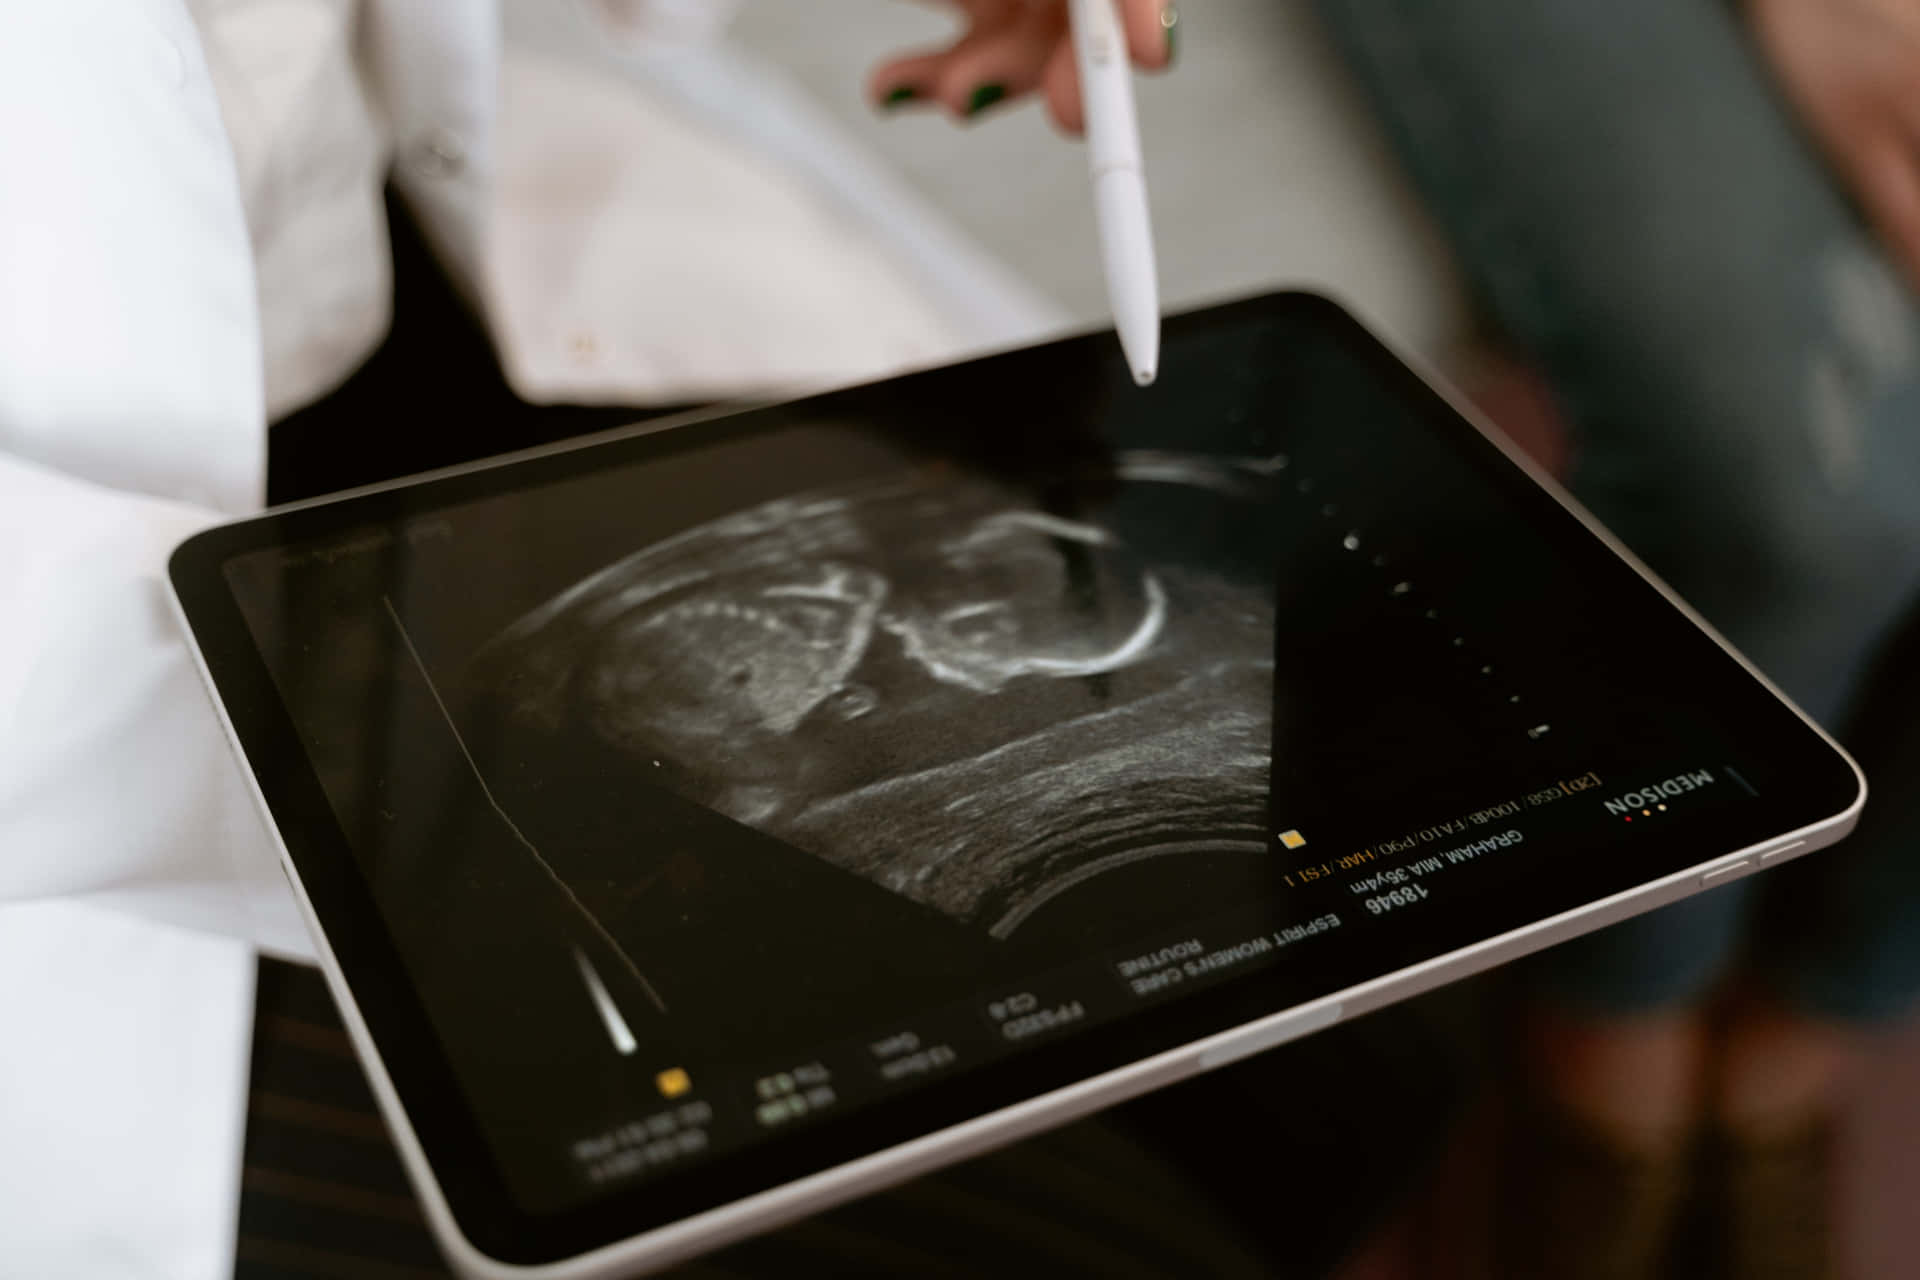 Reveal your baby's unique identity with ultrasound imaging